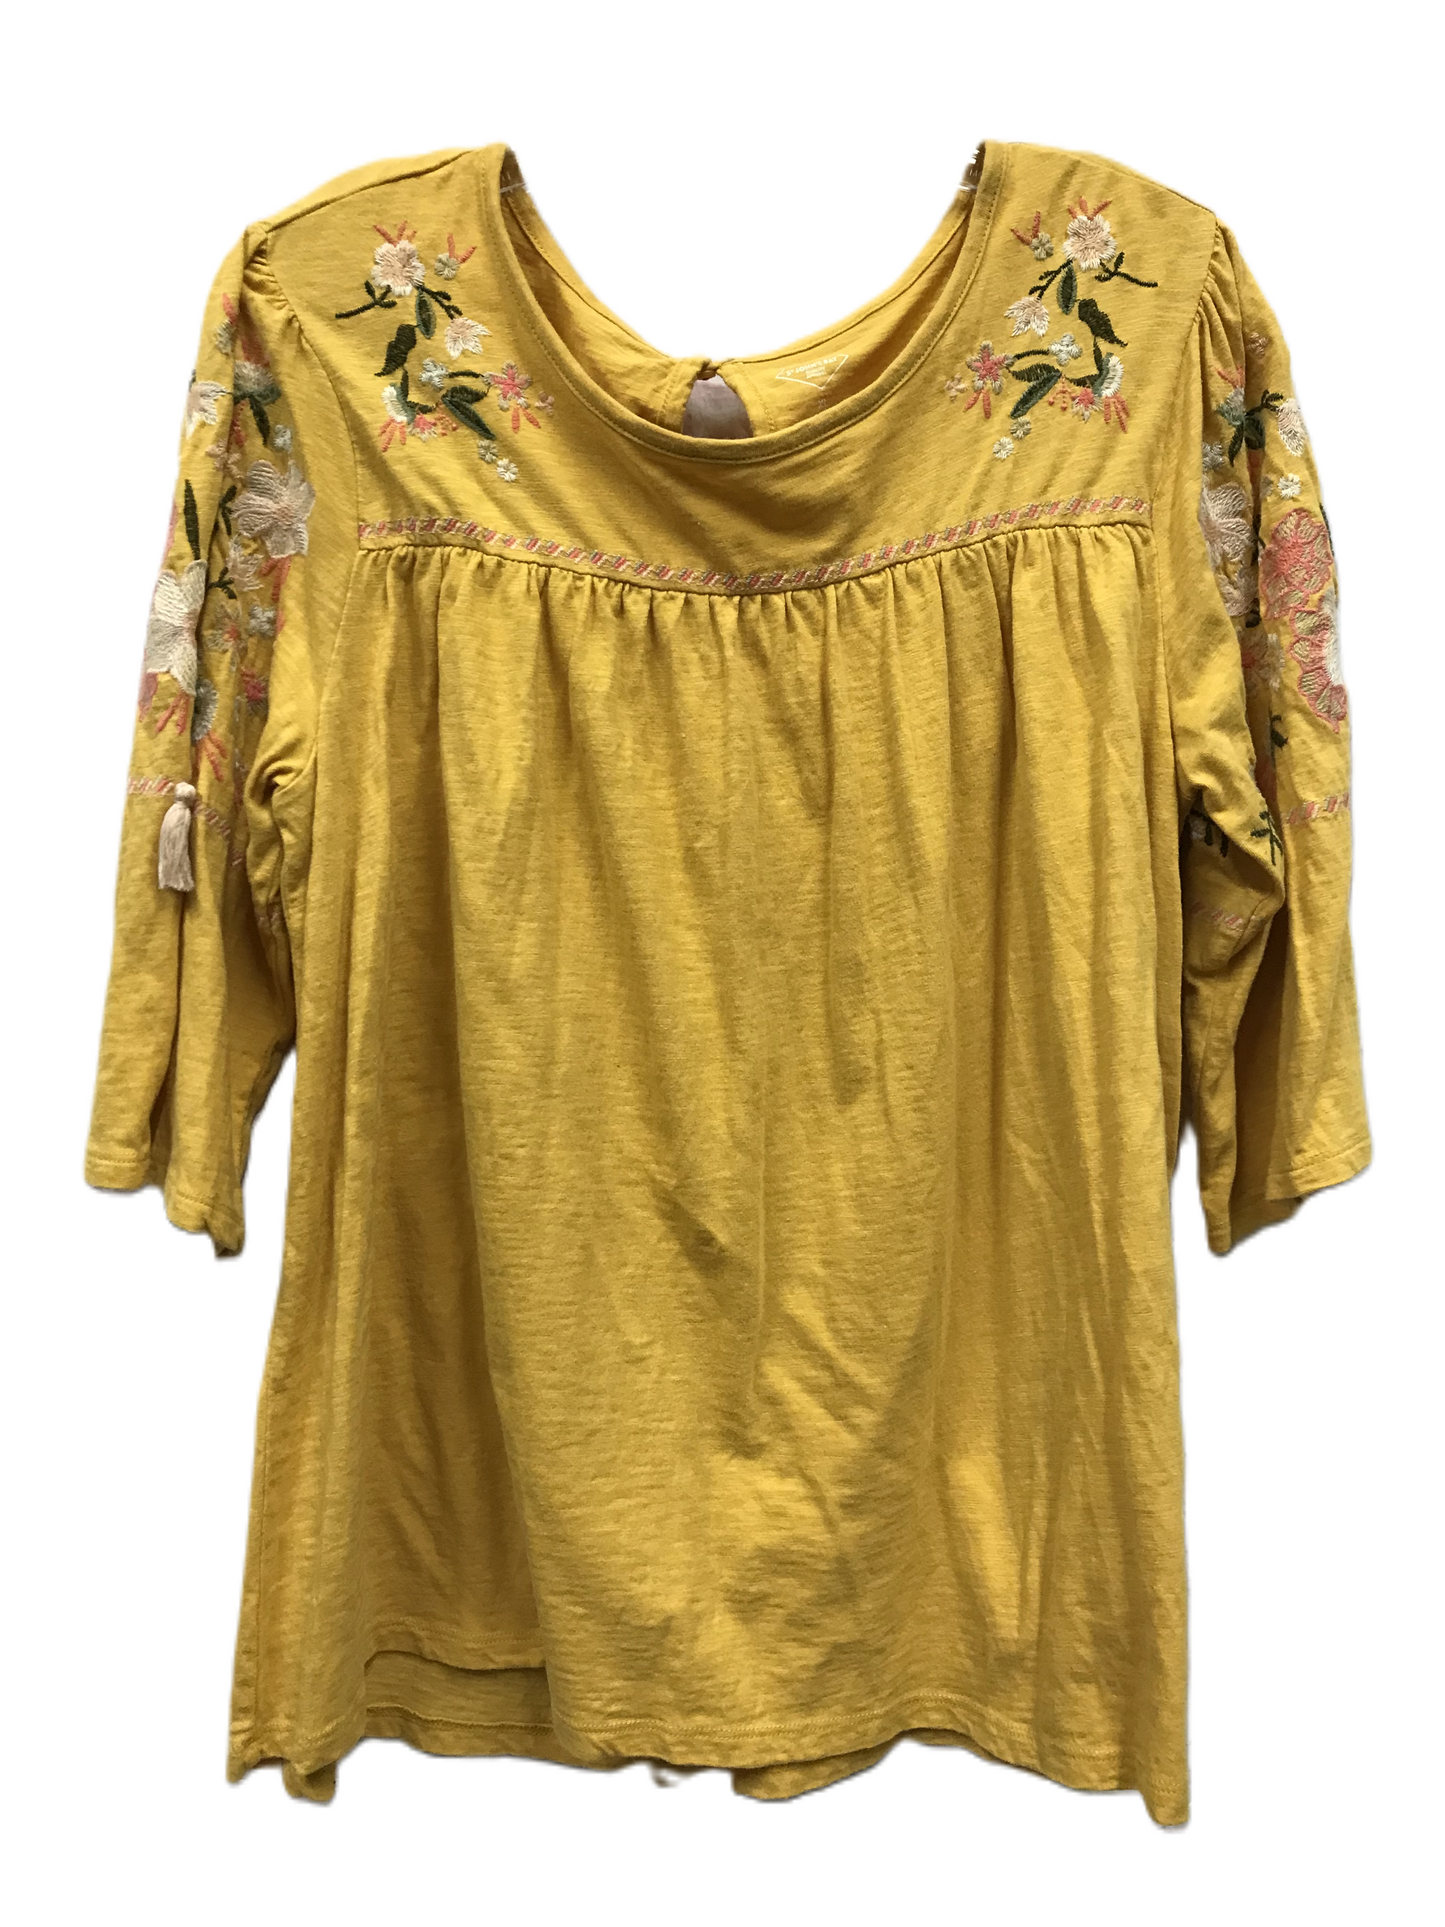 Yellow Top Short Sleeve By St Johns Bay, Size: Xl